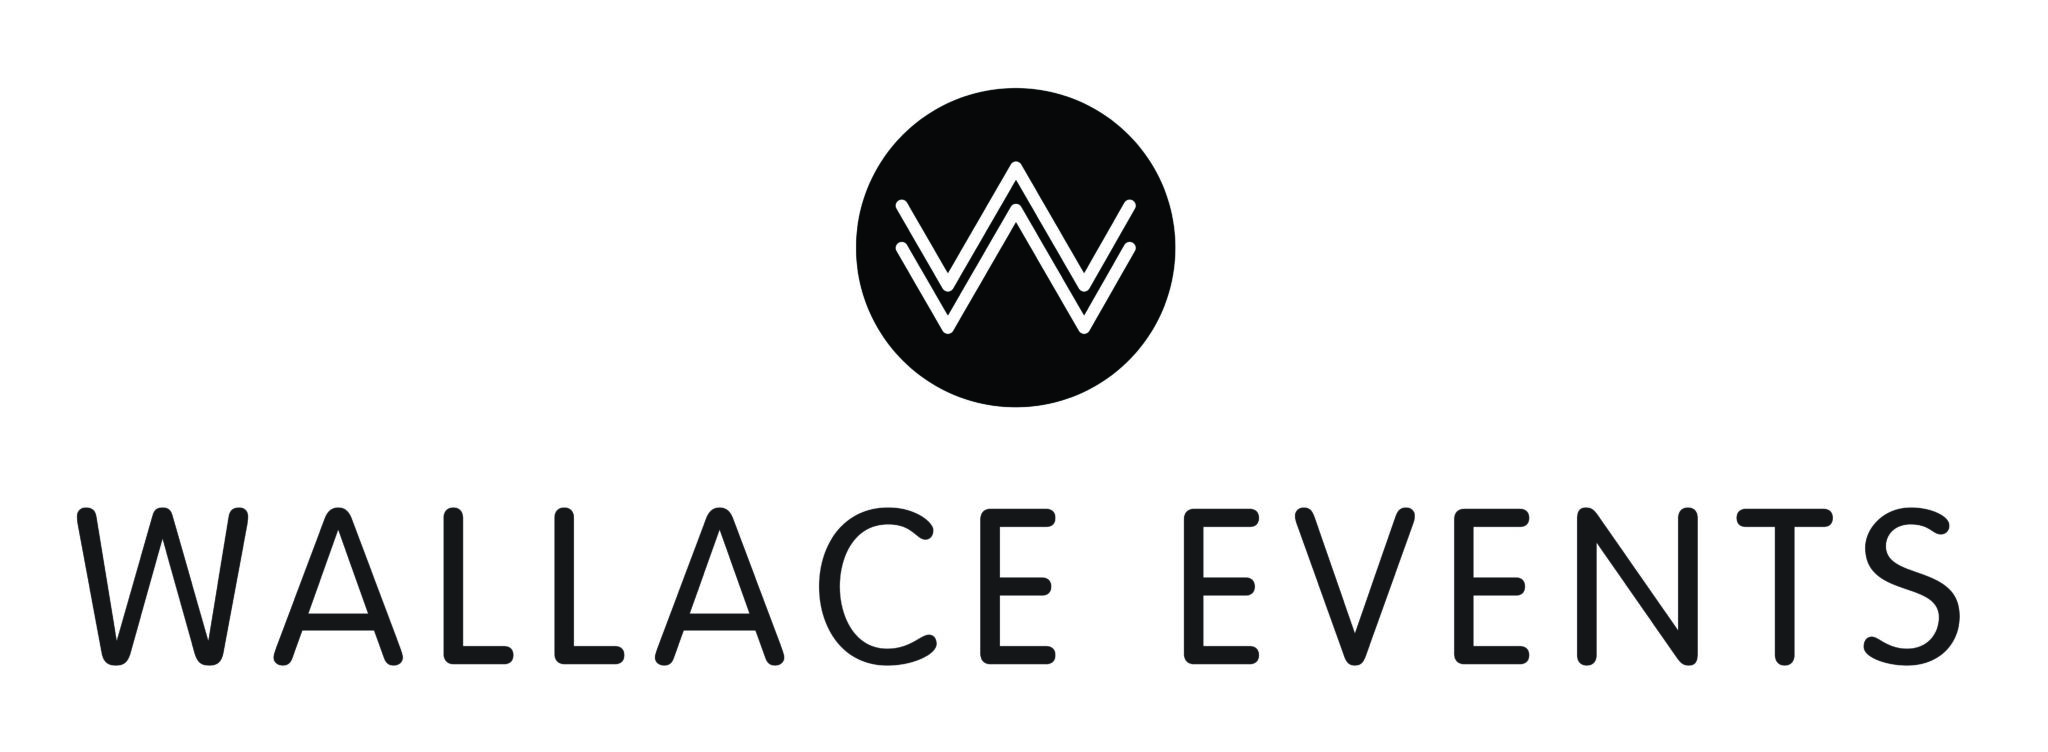 Wallace Events logo